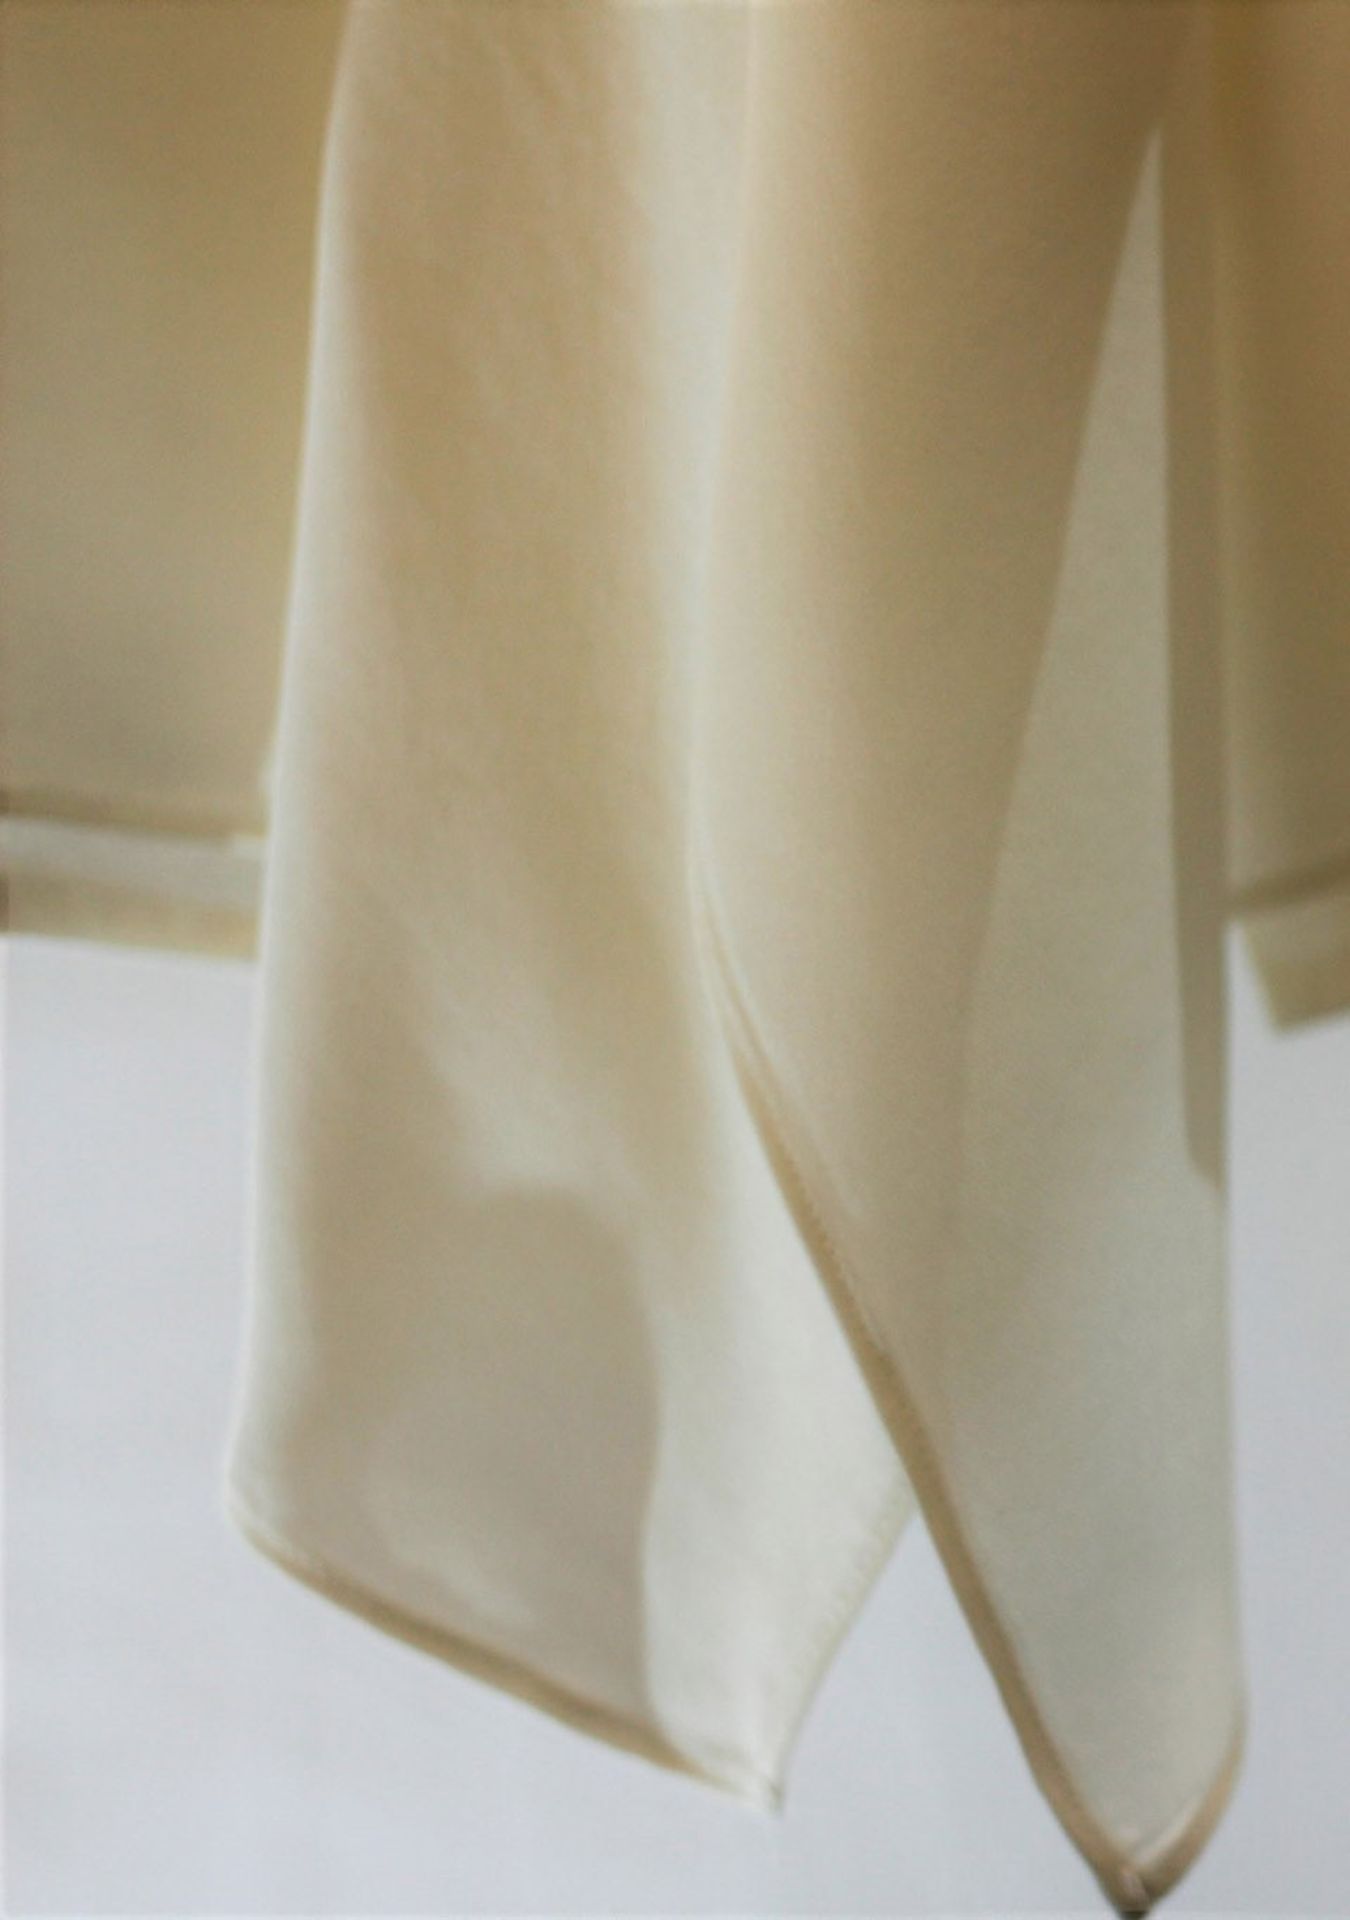 1 x Michael Kors Cream Blouse - Size: L - Material: 100% Silk - From a High End Clothing Boutique In - Image 2 of 4